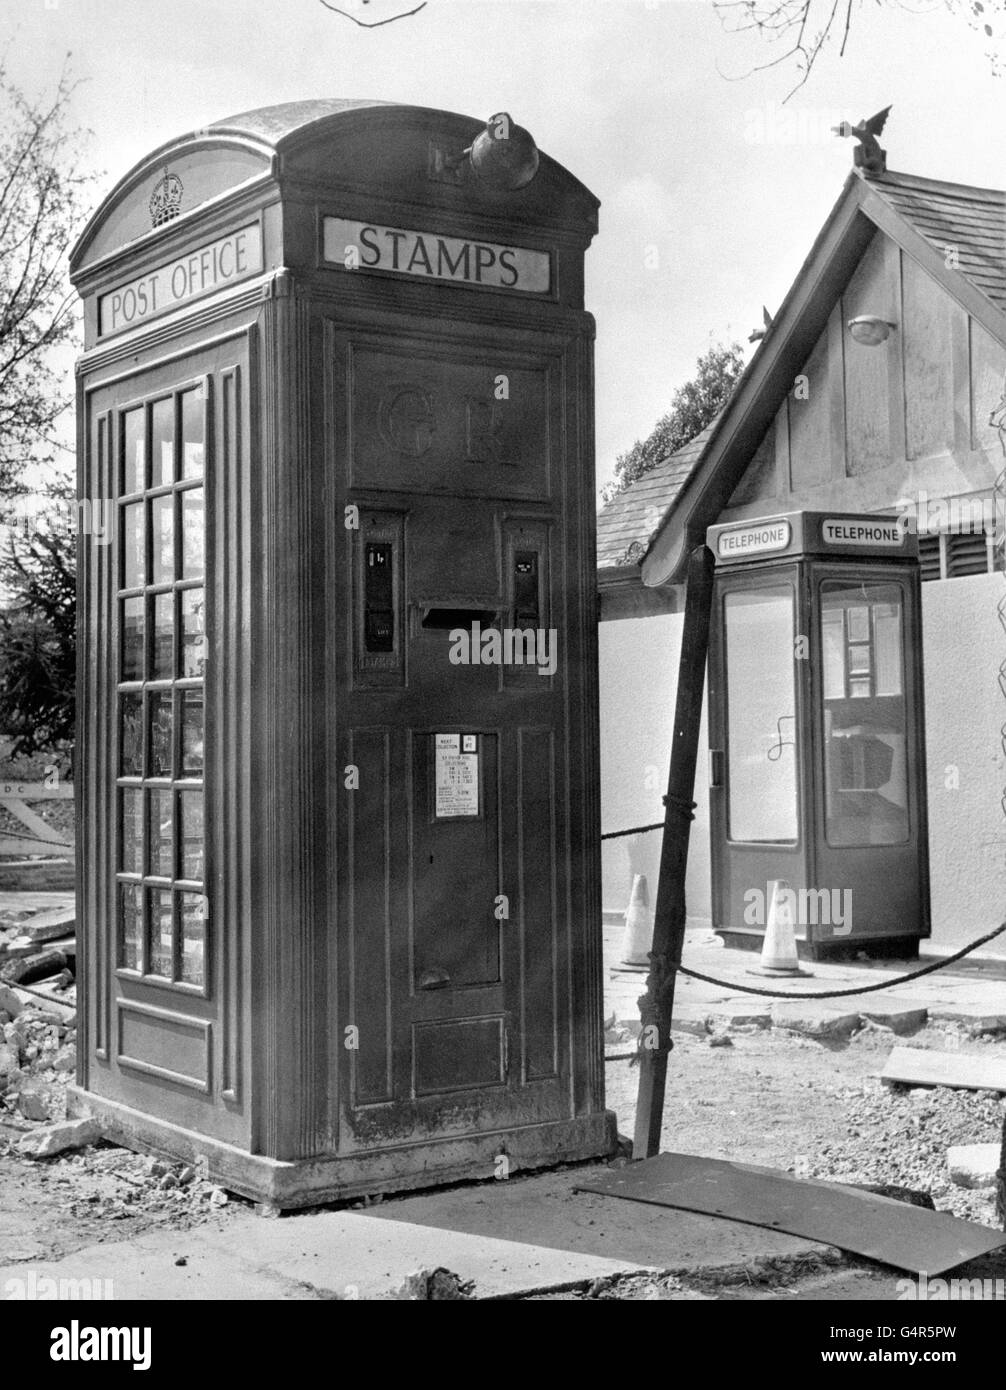 For more than 40 years this box has supplied a telephone service, postal and stamp facilities, outside the Newton Abbot railway station in Devon. Now it's giving way to a modern kiosk (right) and will find a home in the Post Office museum in Somerset. Stock Photo